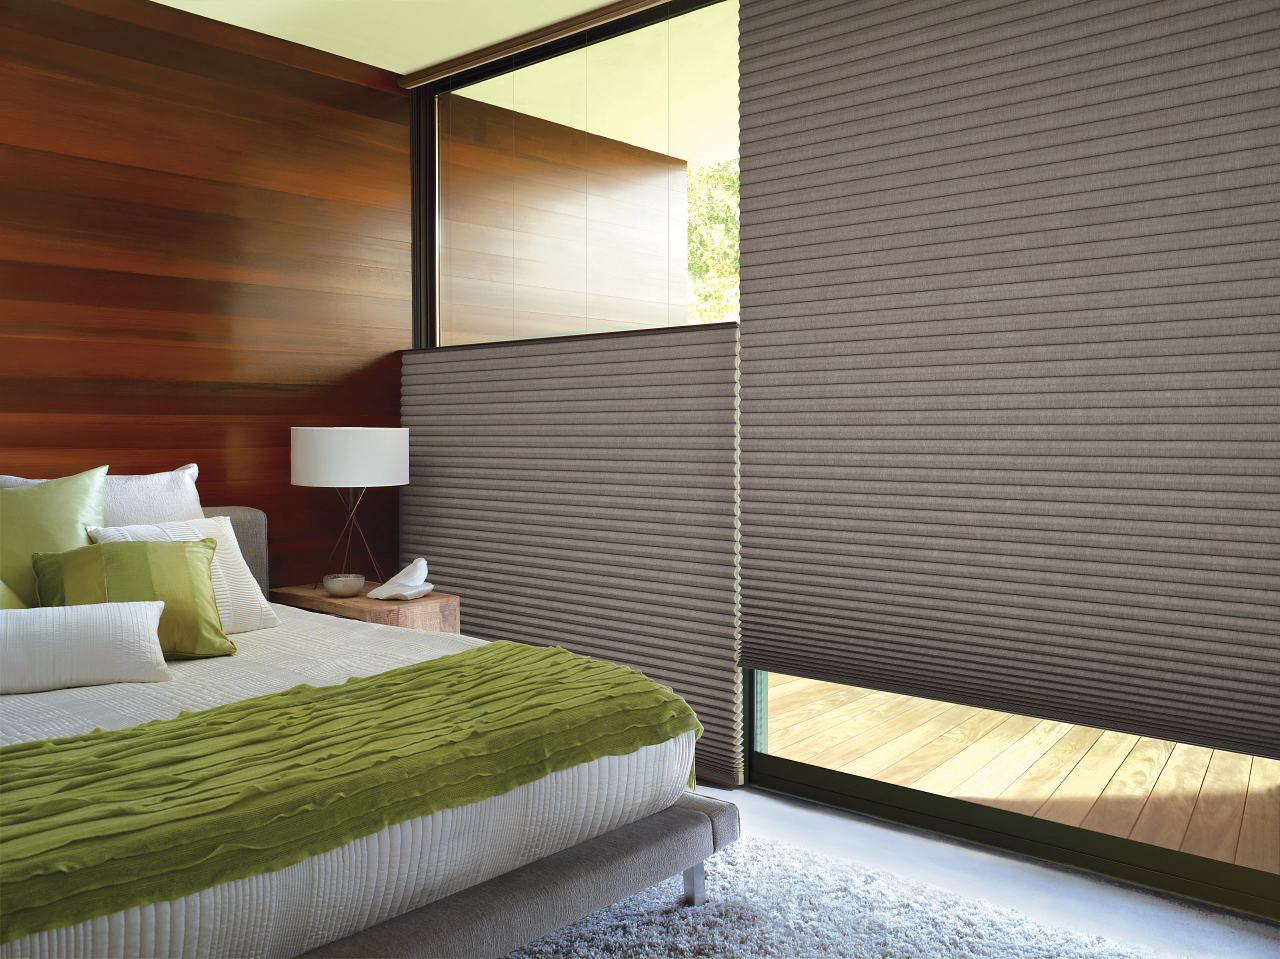 Motorized shades are a great addition to your home automation system.